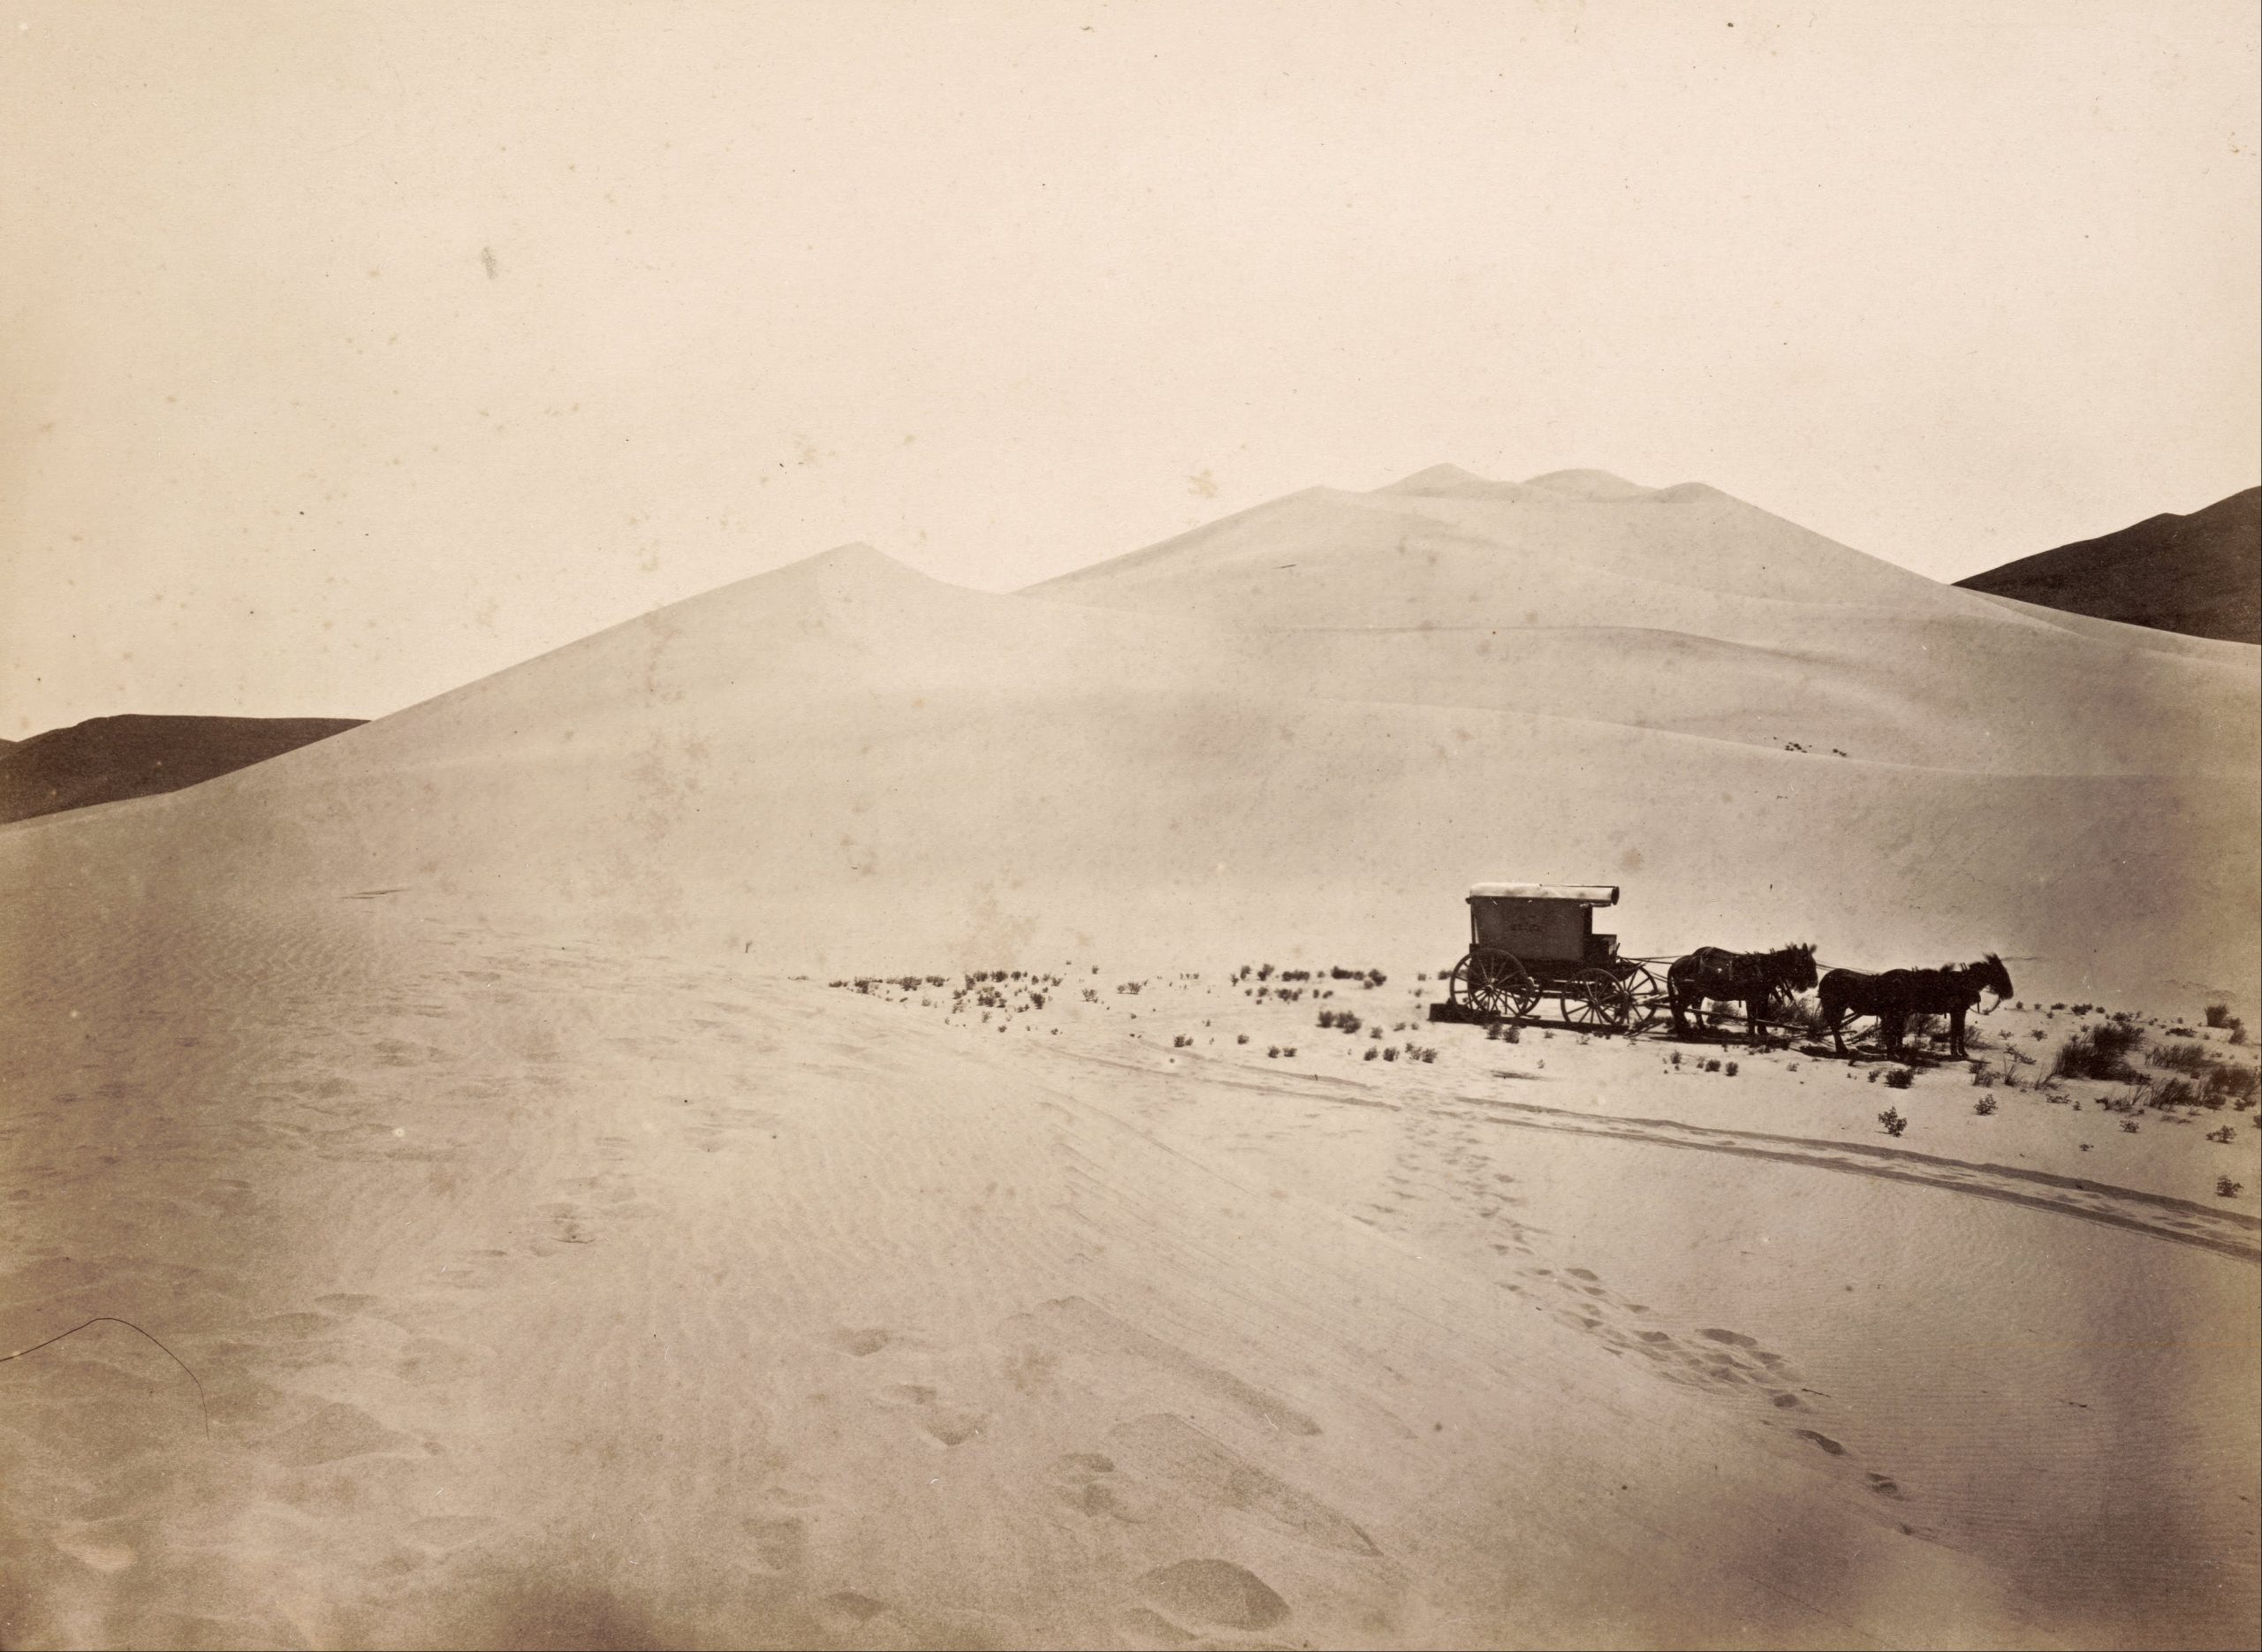 A black and white photograph with a warm undertone of a dessert with hills in the background. A covered cart with horses is in the middle ground on the right side.